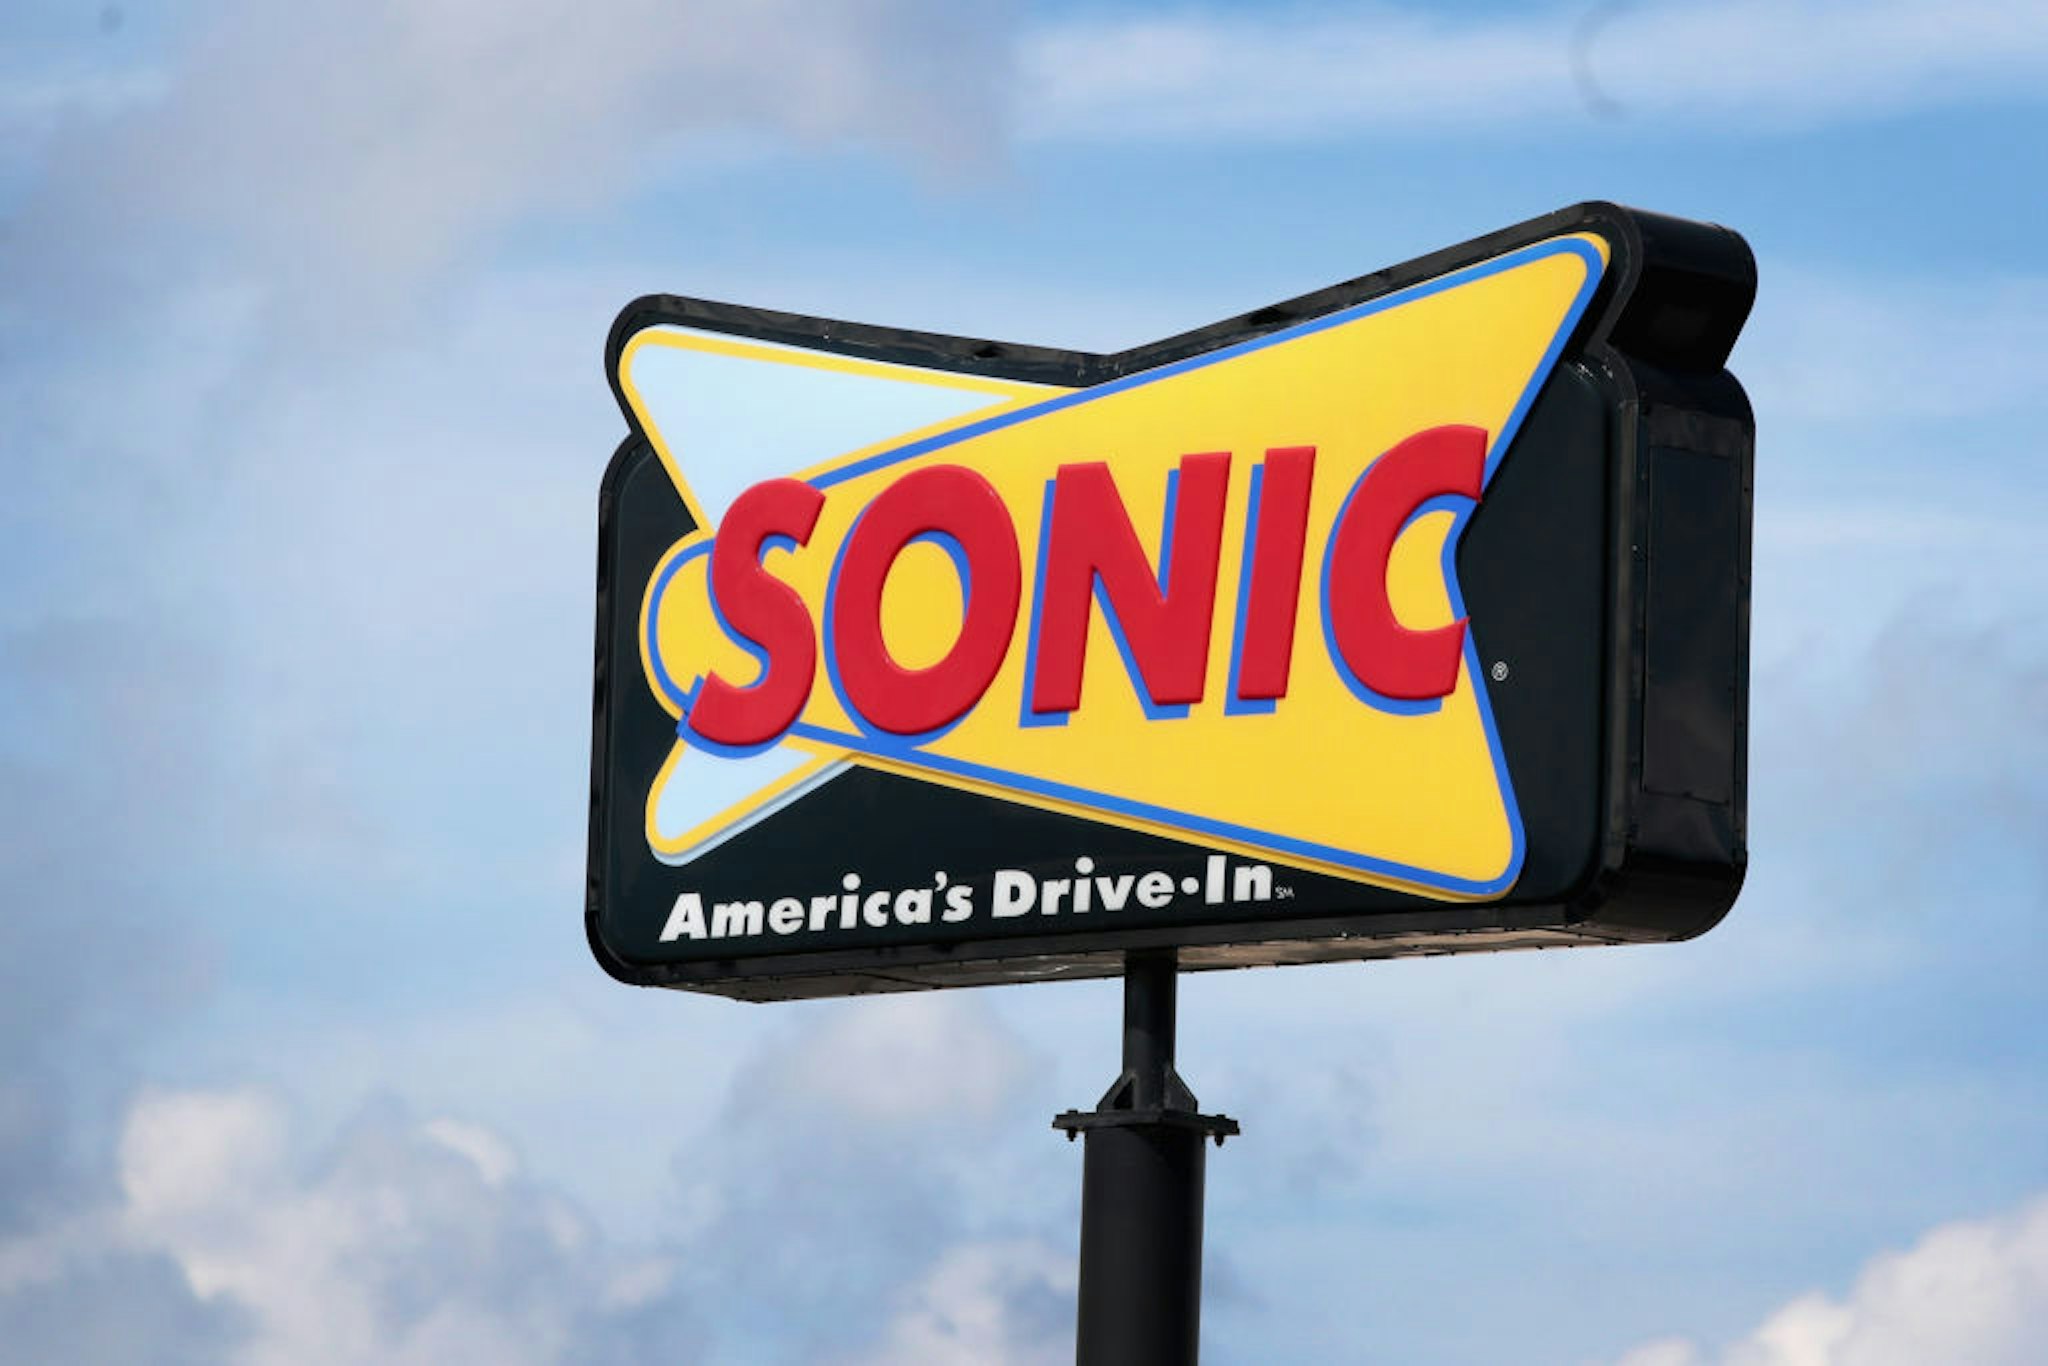 CICERO, IL - SEPTEMBER 25: A sign advertises the location of a Sonic restaurant on September 25, 2018 in Cicero, Illinois. Inspire Brands Inc., the parent company of Arby's and Buffalo Wild Wings, announced today that it was buying Sonic for $2.3 billion.